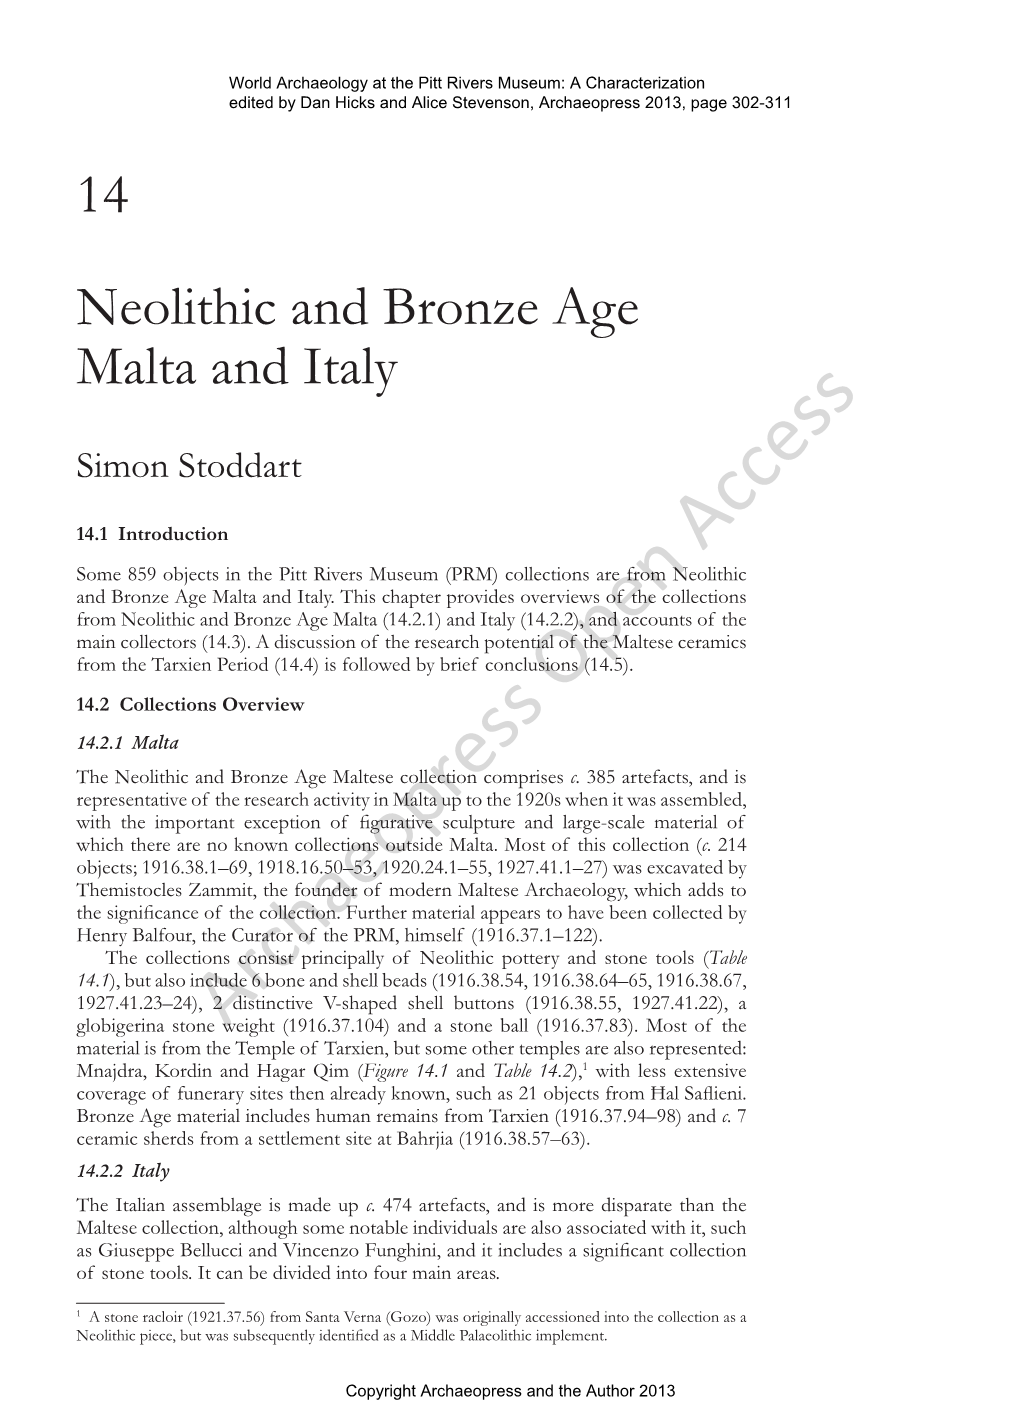 Neolithic and Bronze Age Malta and Italy